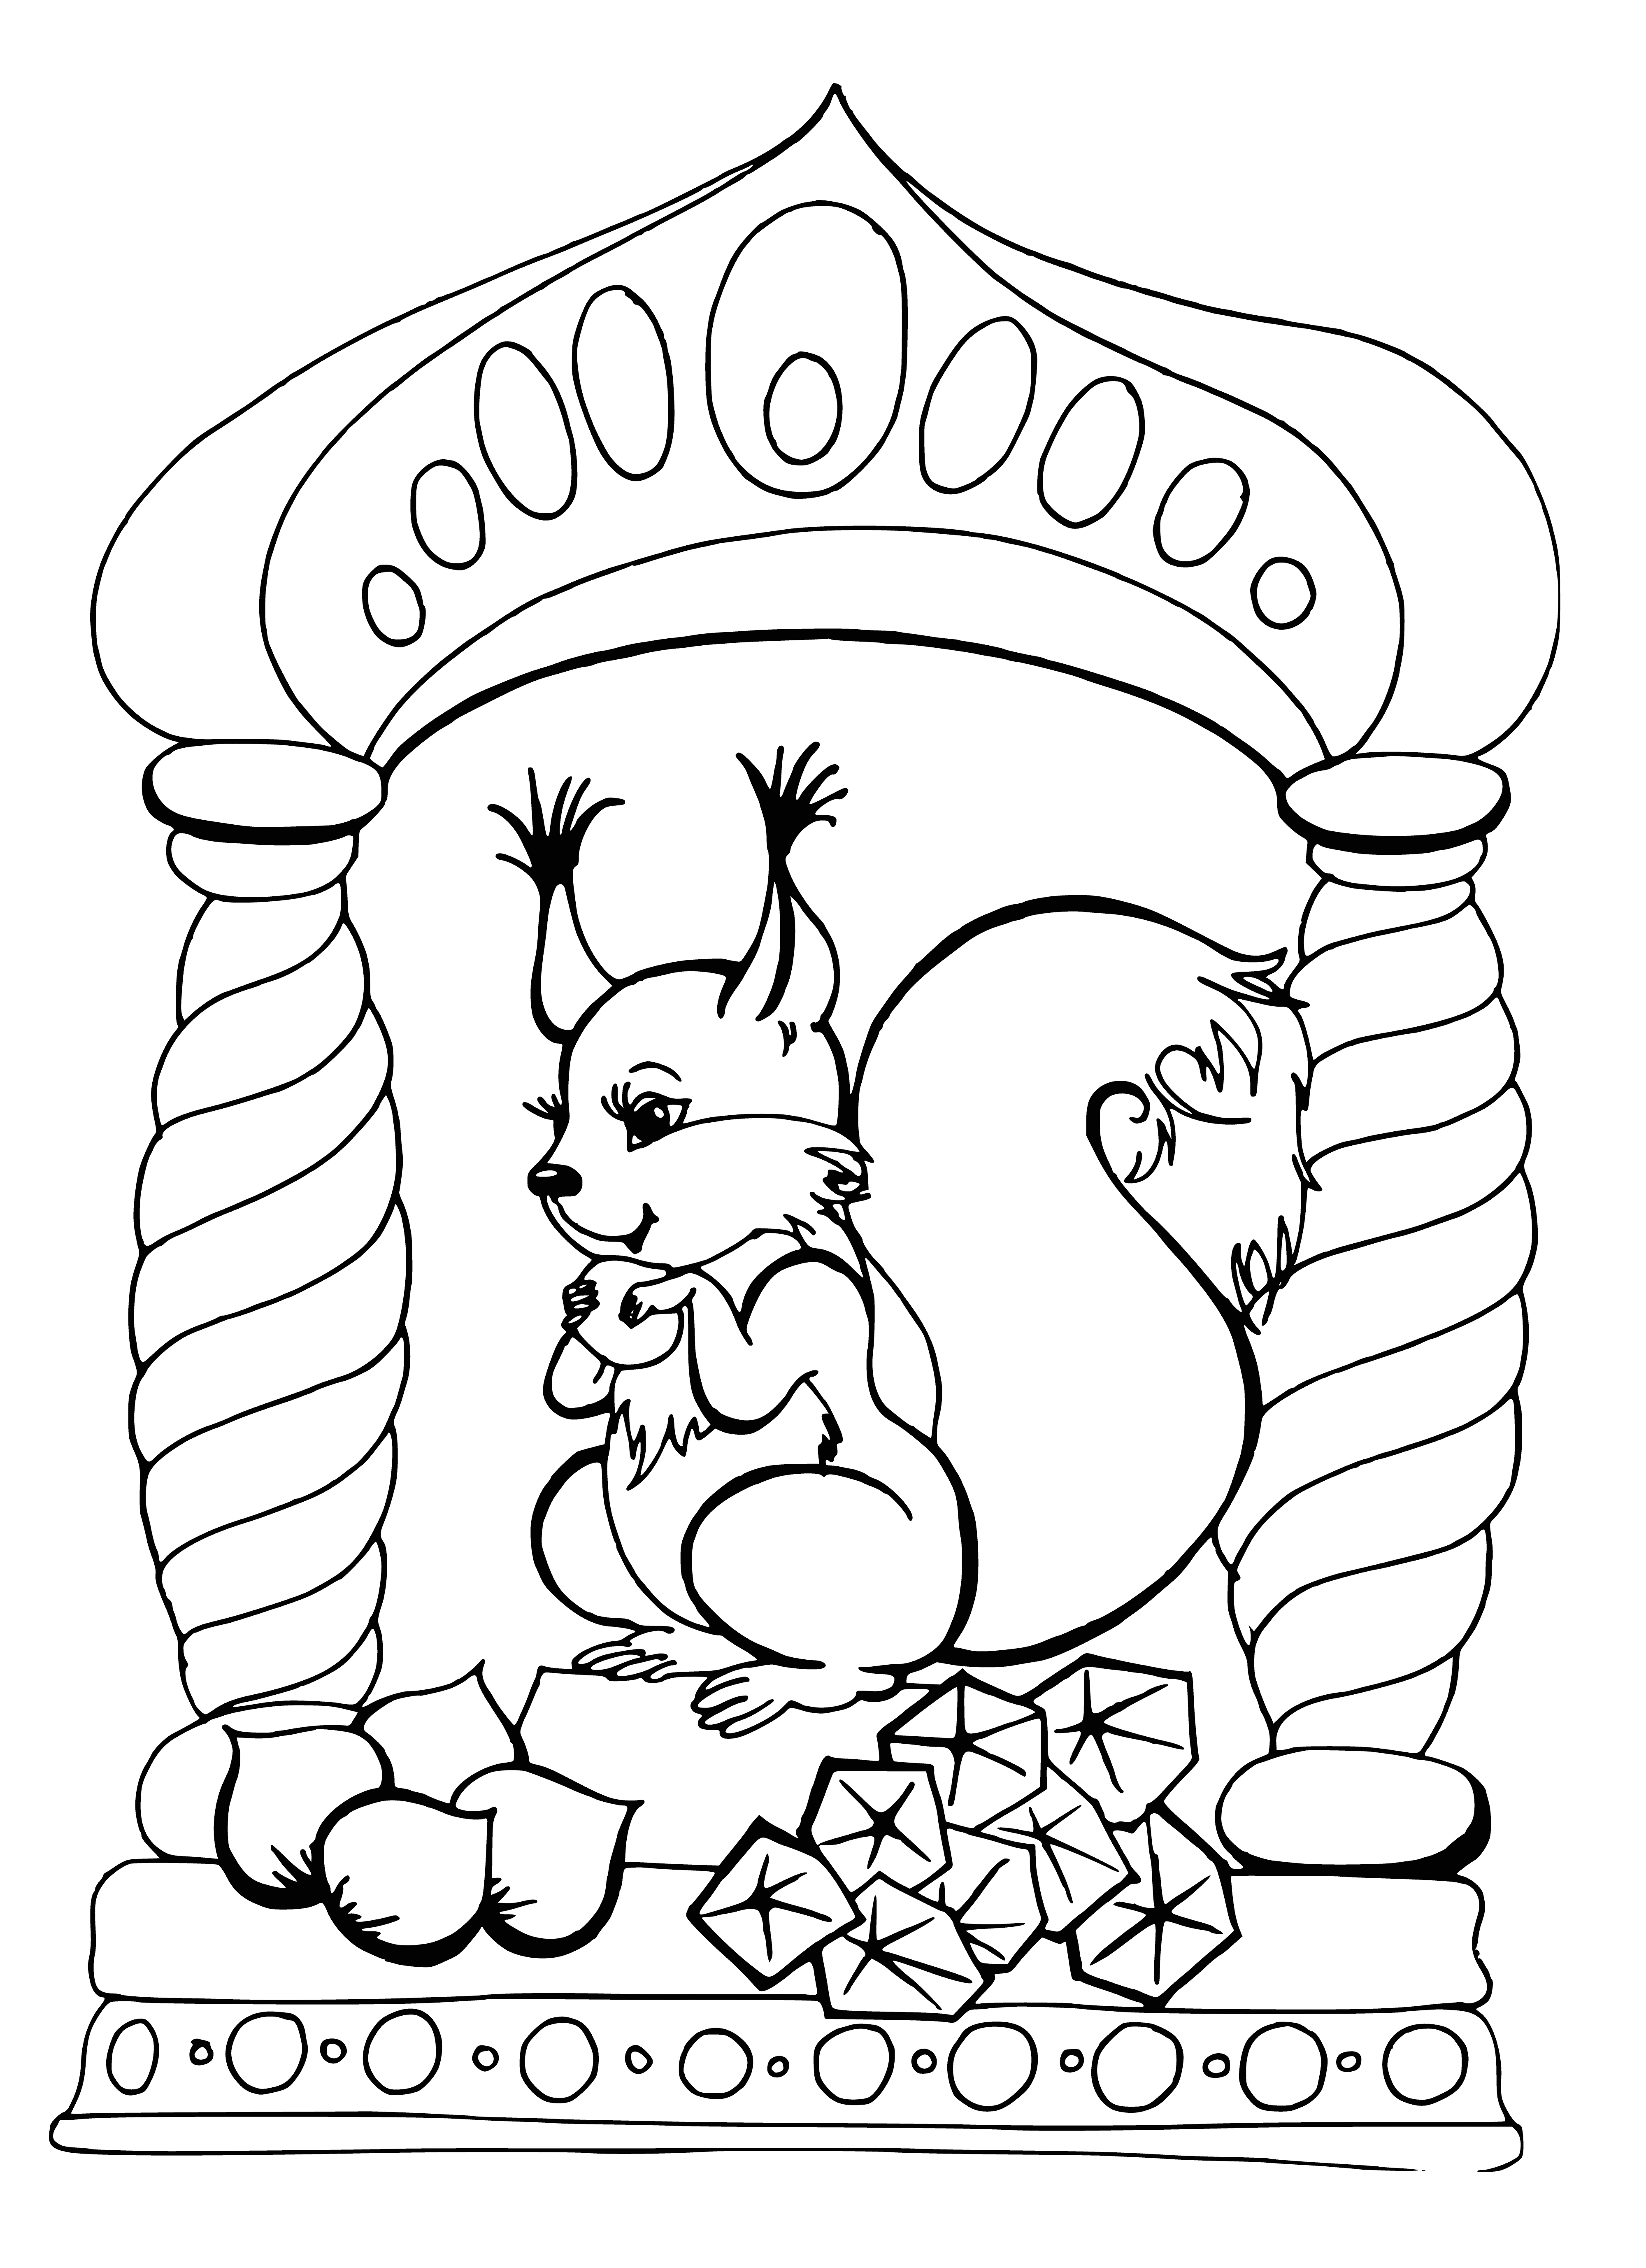 coloring page: Squirrel perched atop tree branch eating something, background of trees/mountains. Acorns scattered at base of tree. #ColoringPage